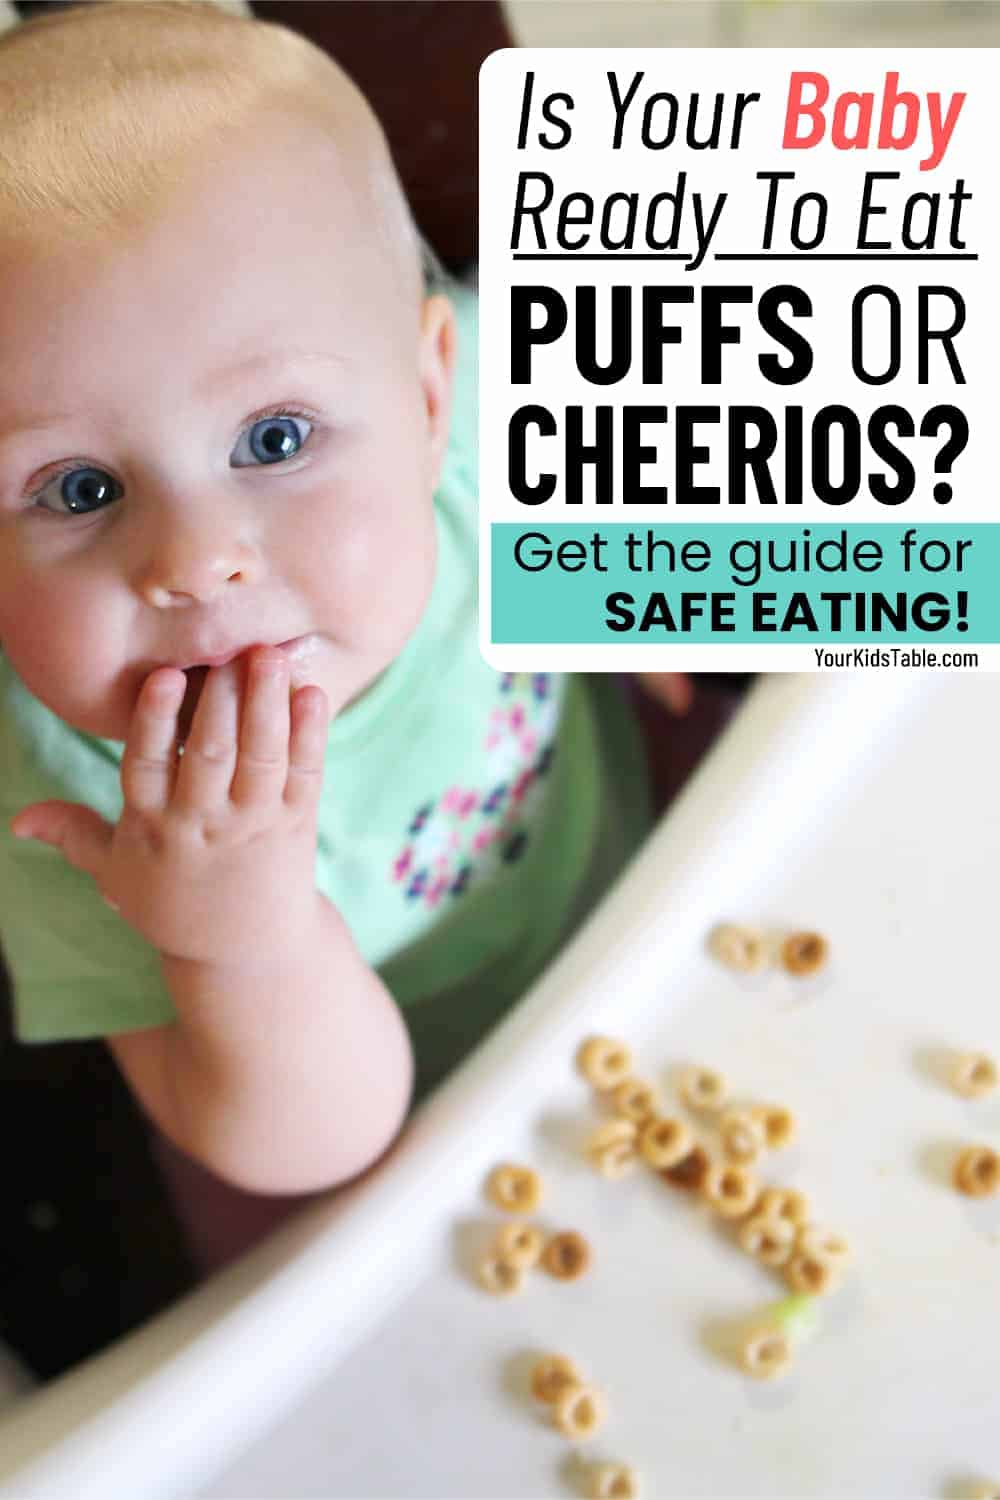 Parents are often wondering, “When can babies eat cheerios?” Or, puffs, toast, cheese, watermelon, and banana. Learn when so you can feed your baby safely! 